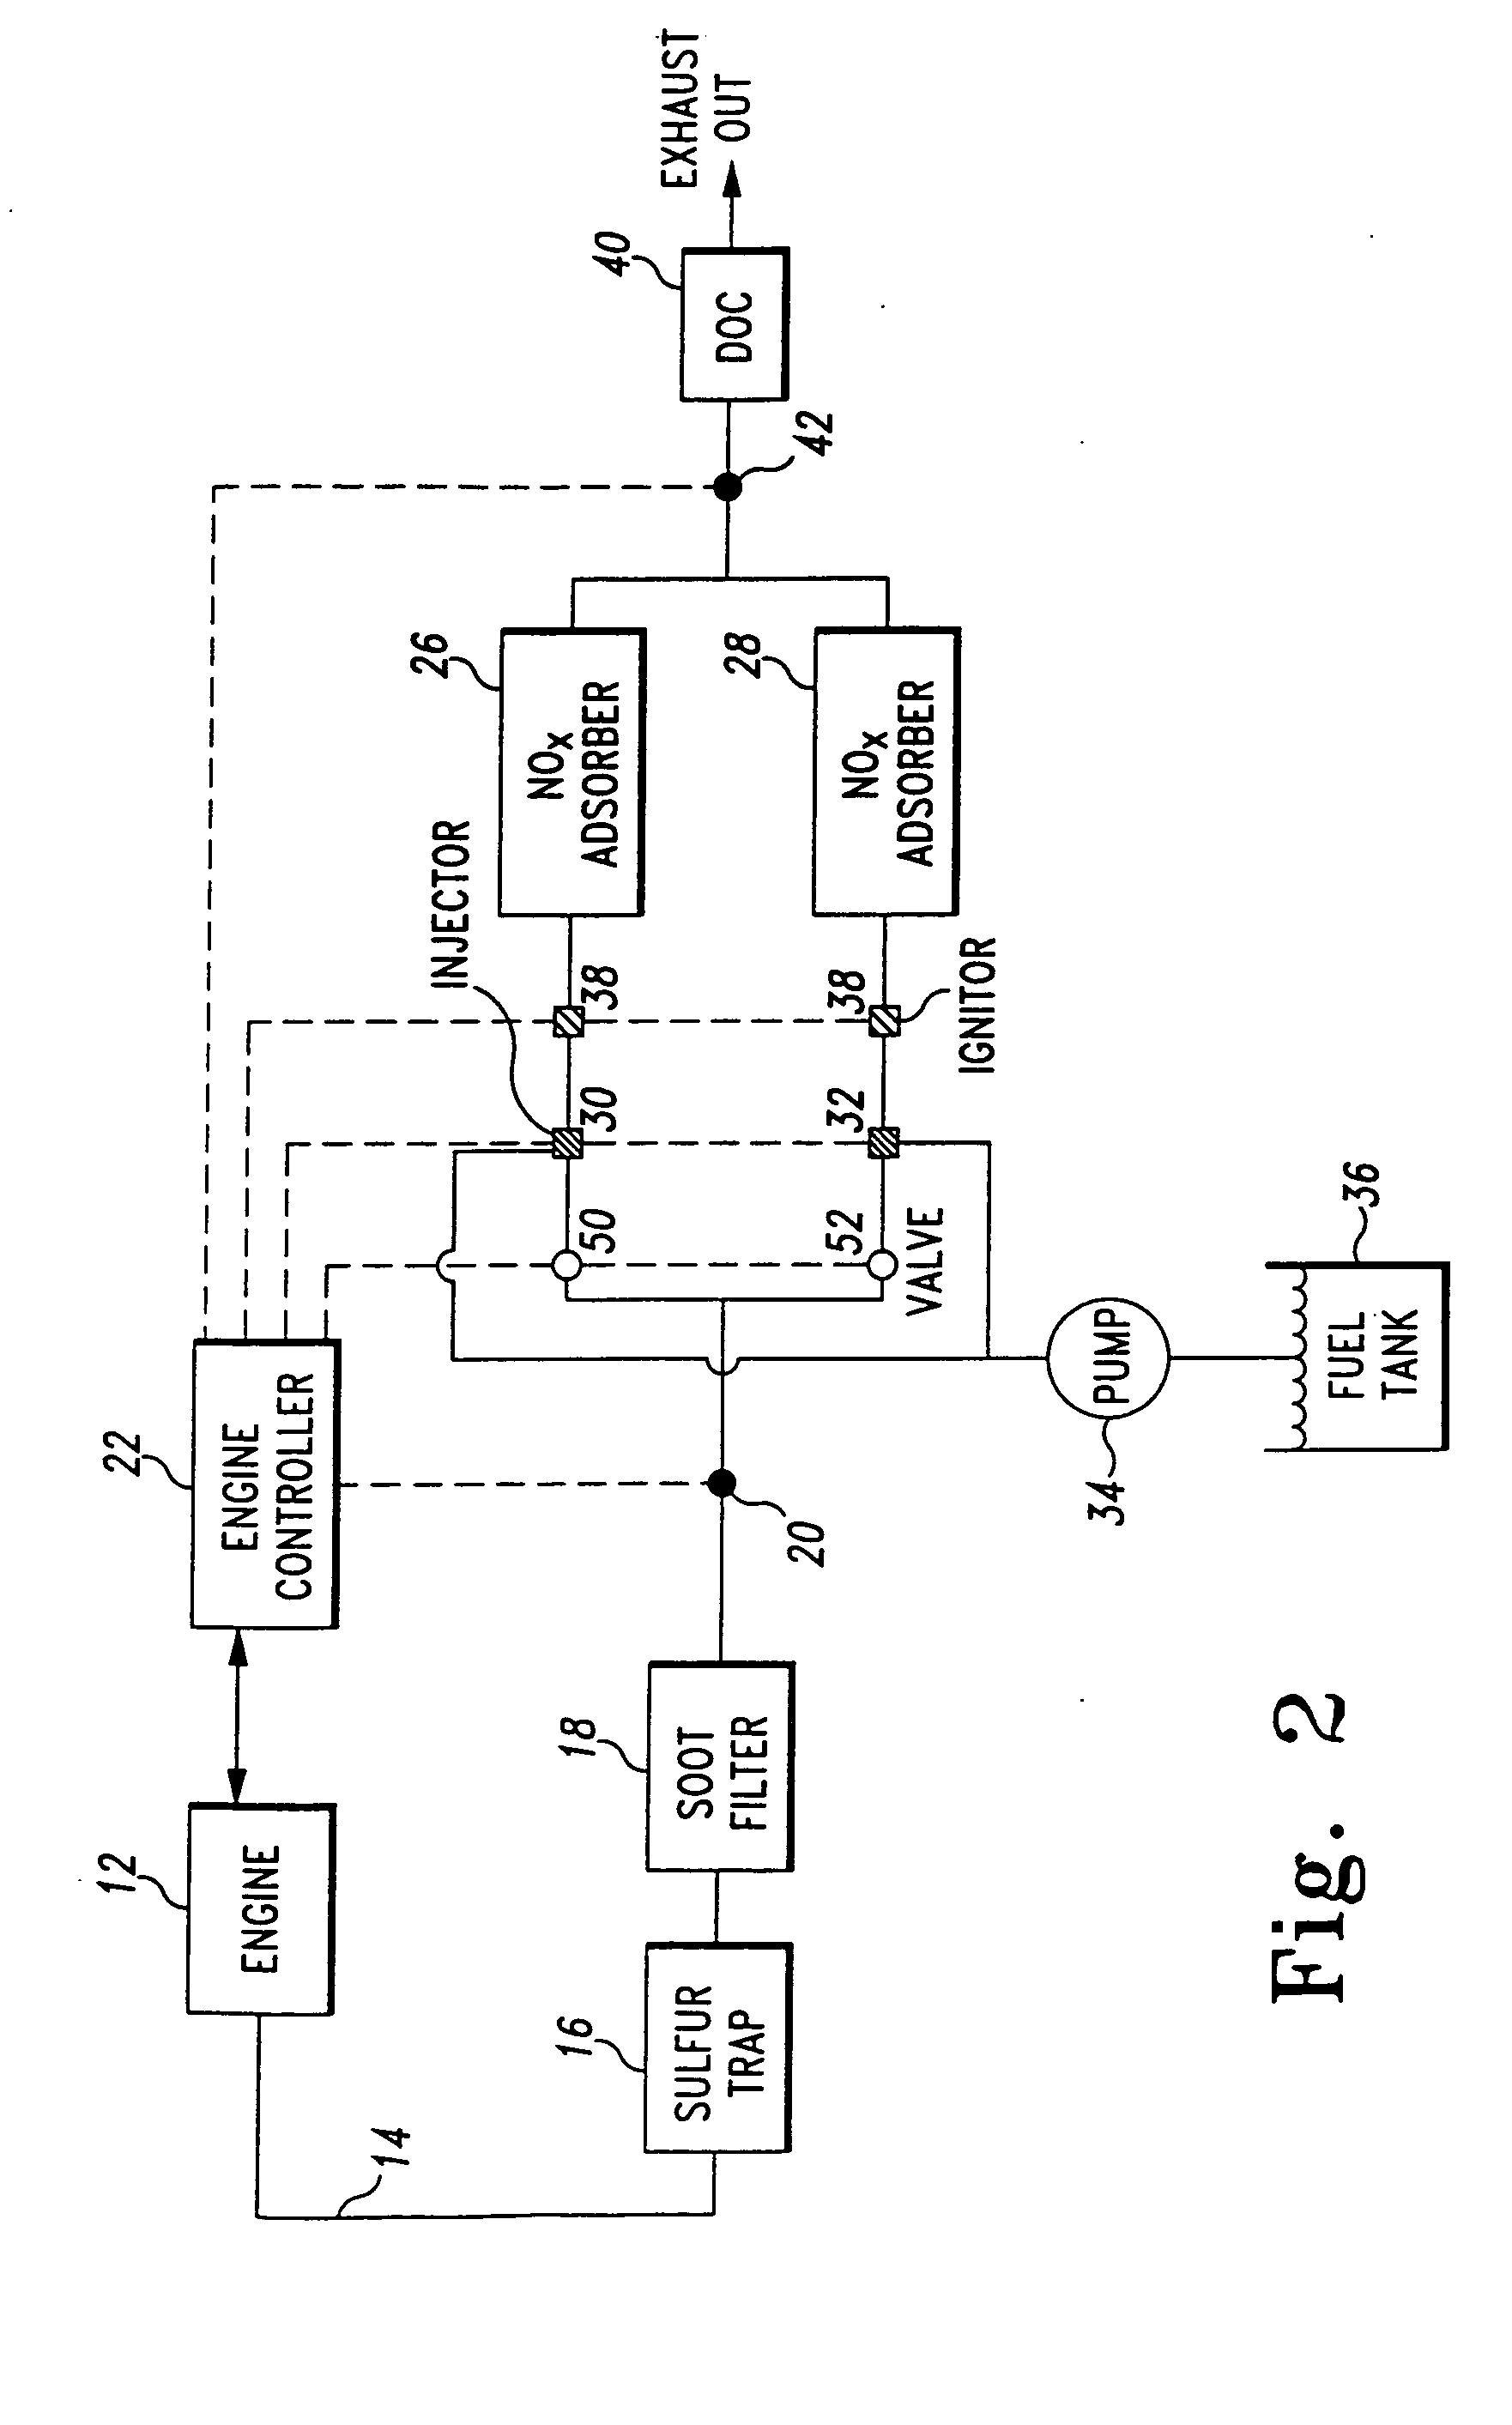 NOx adsorber aftertreatment system for internal combustion engines